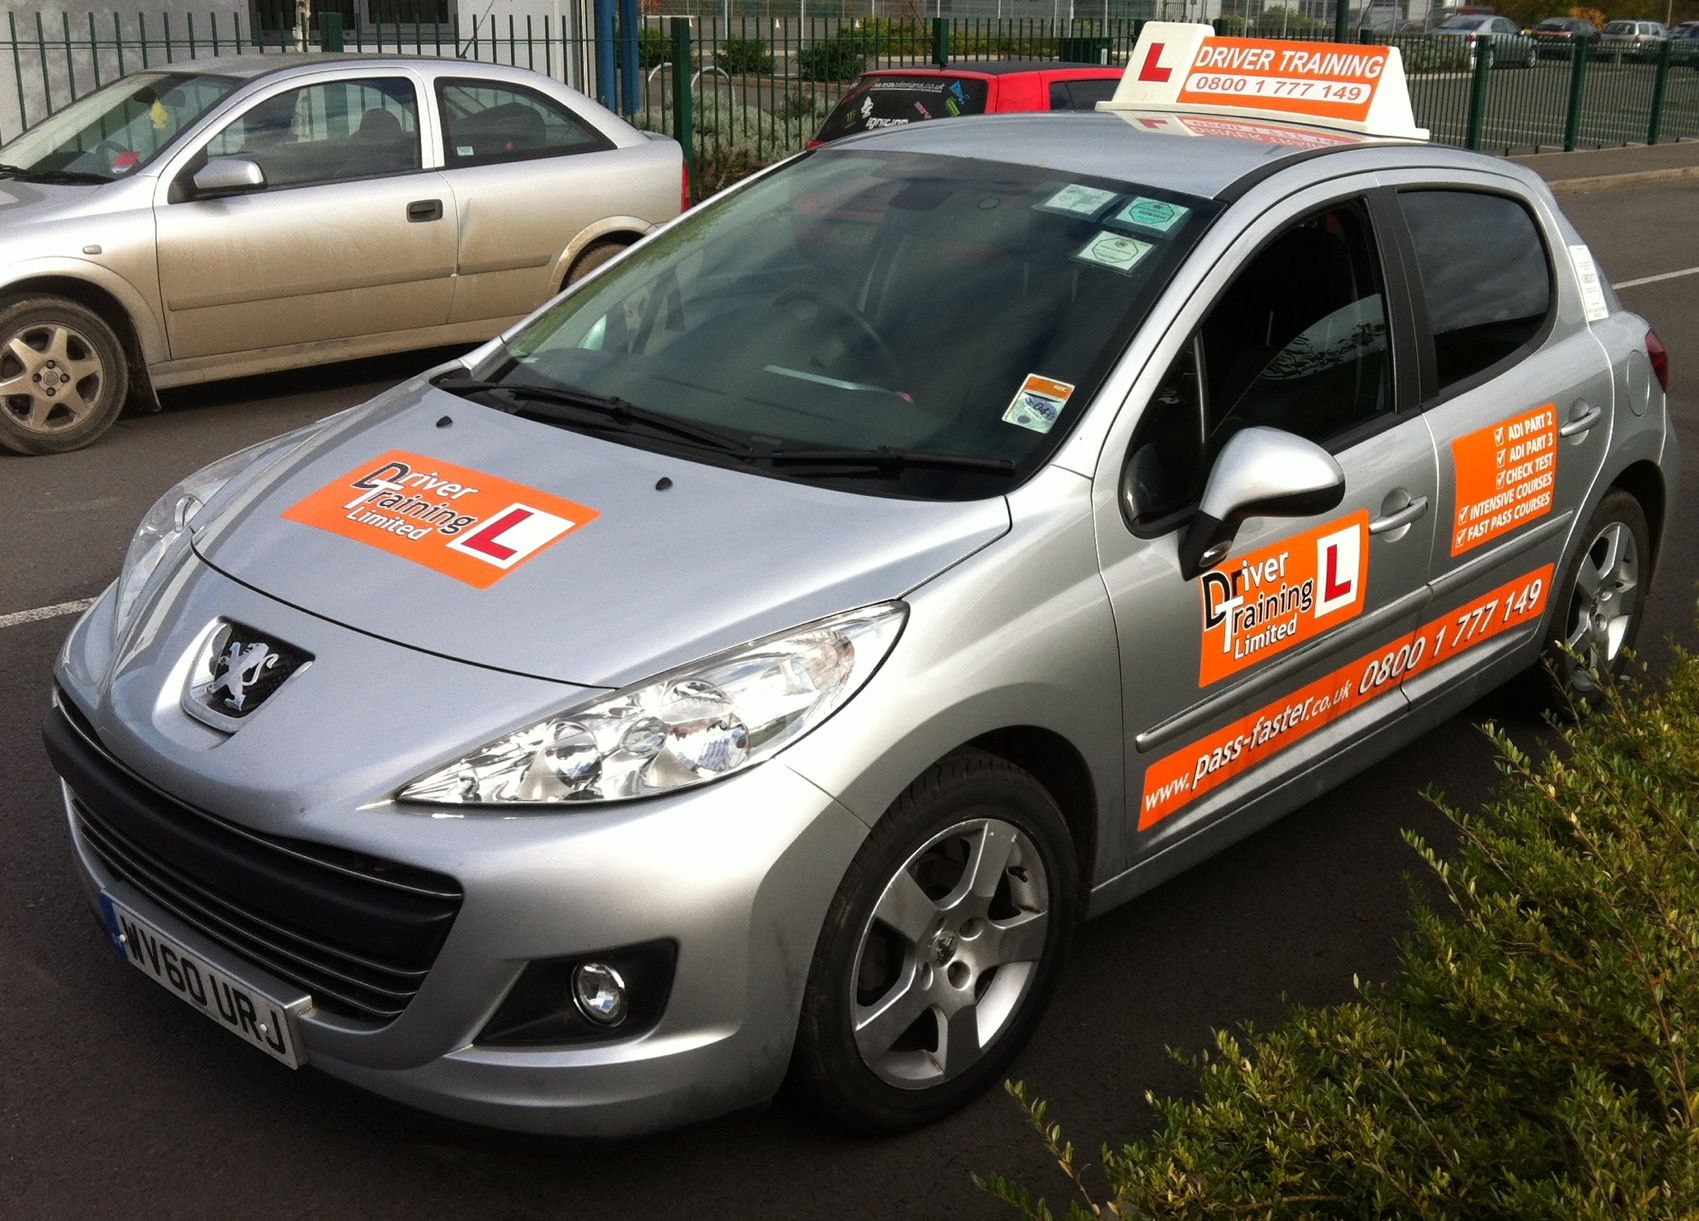 intensive driving instructor training courses